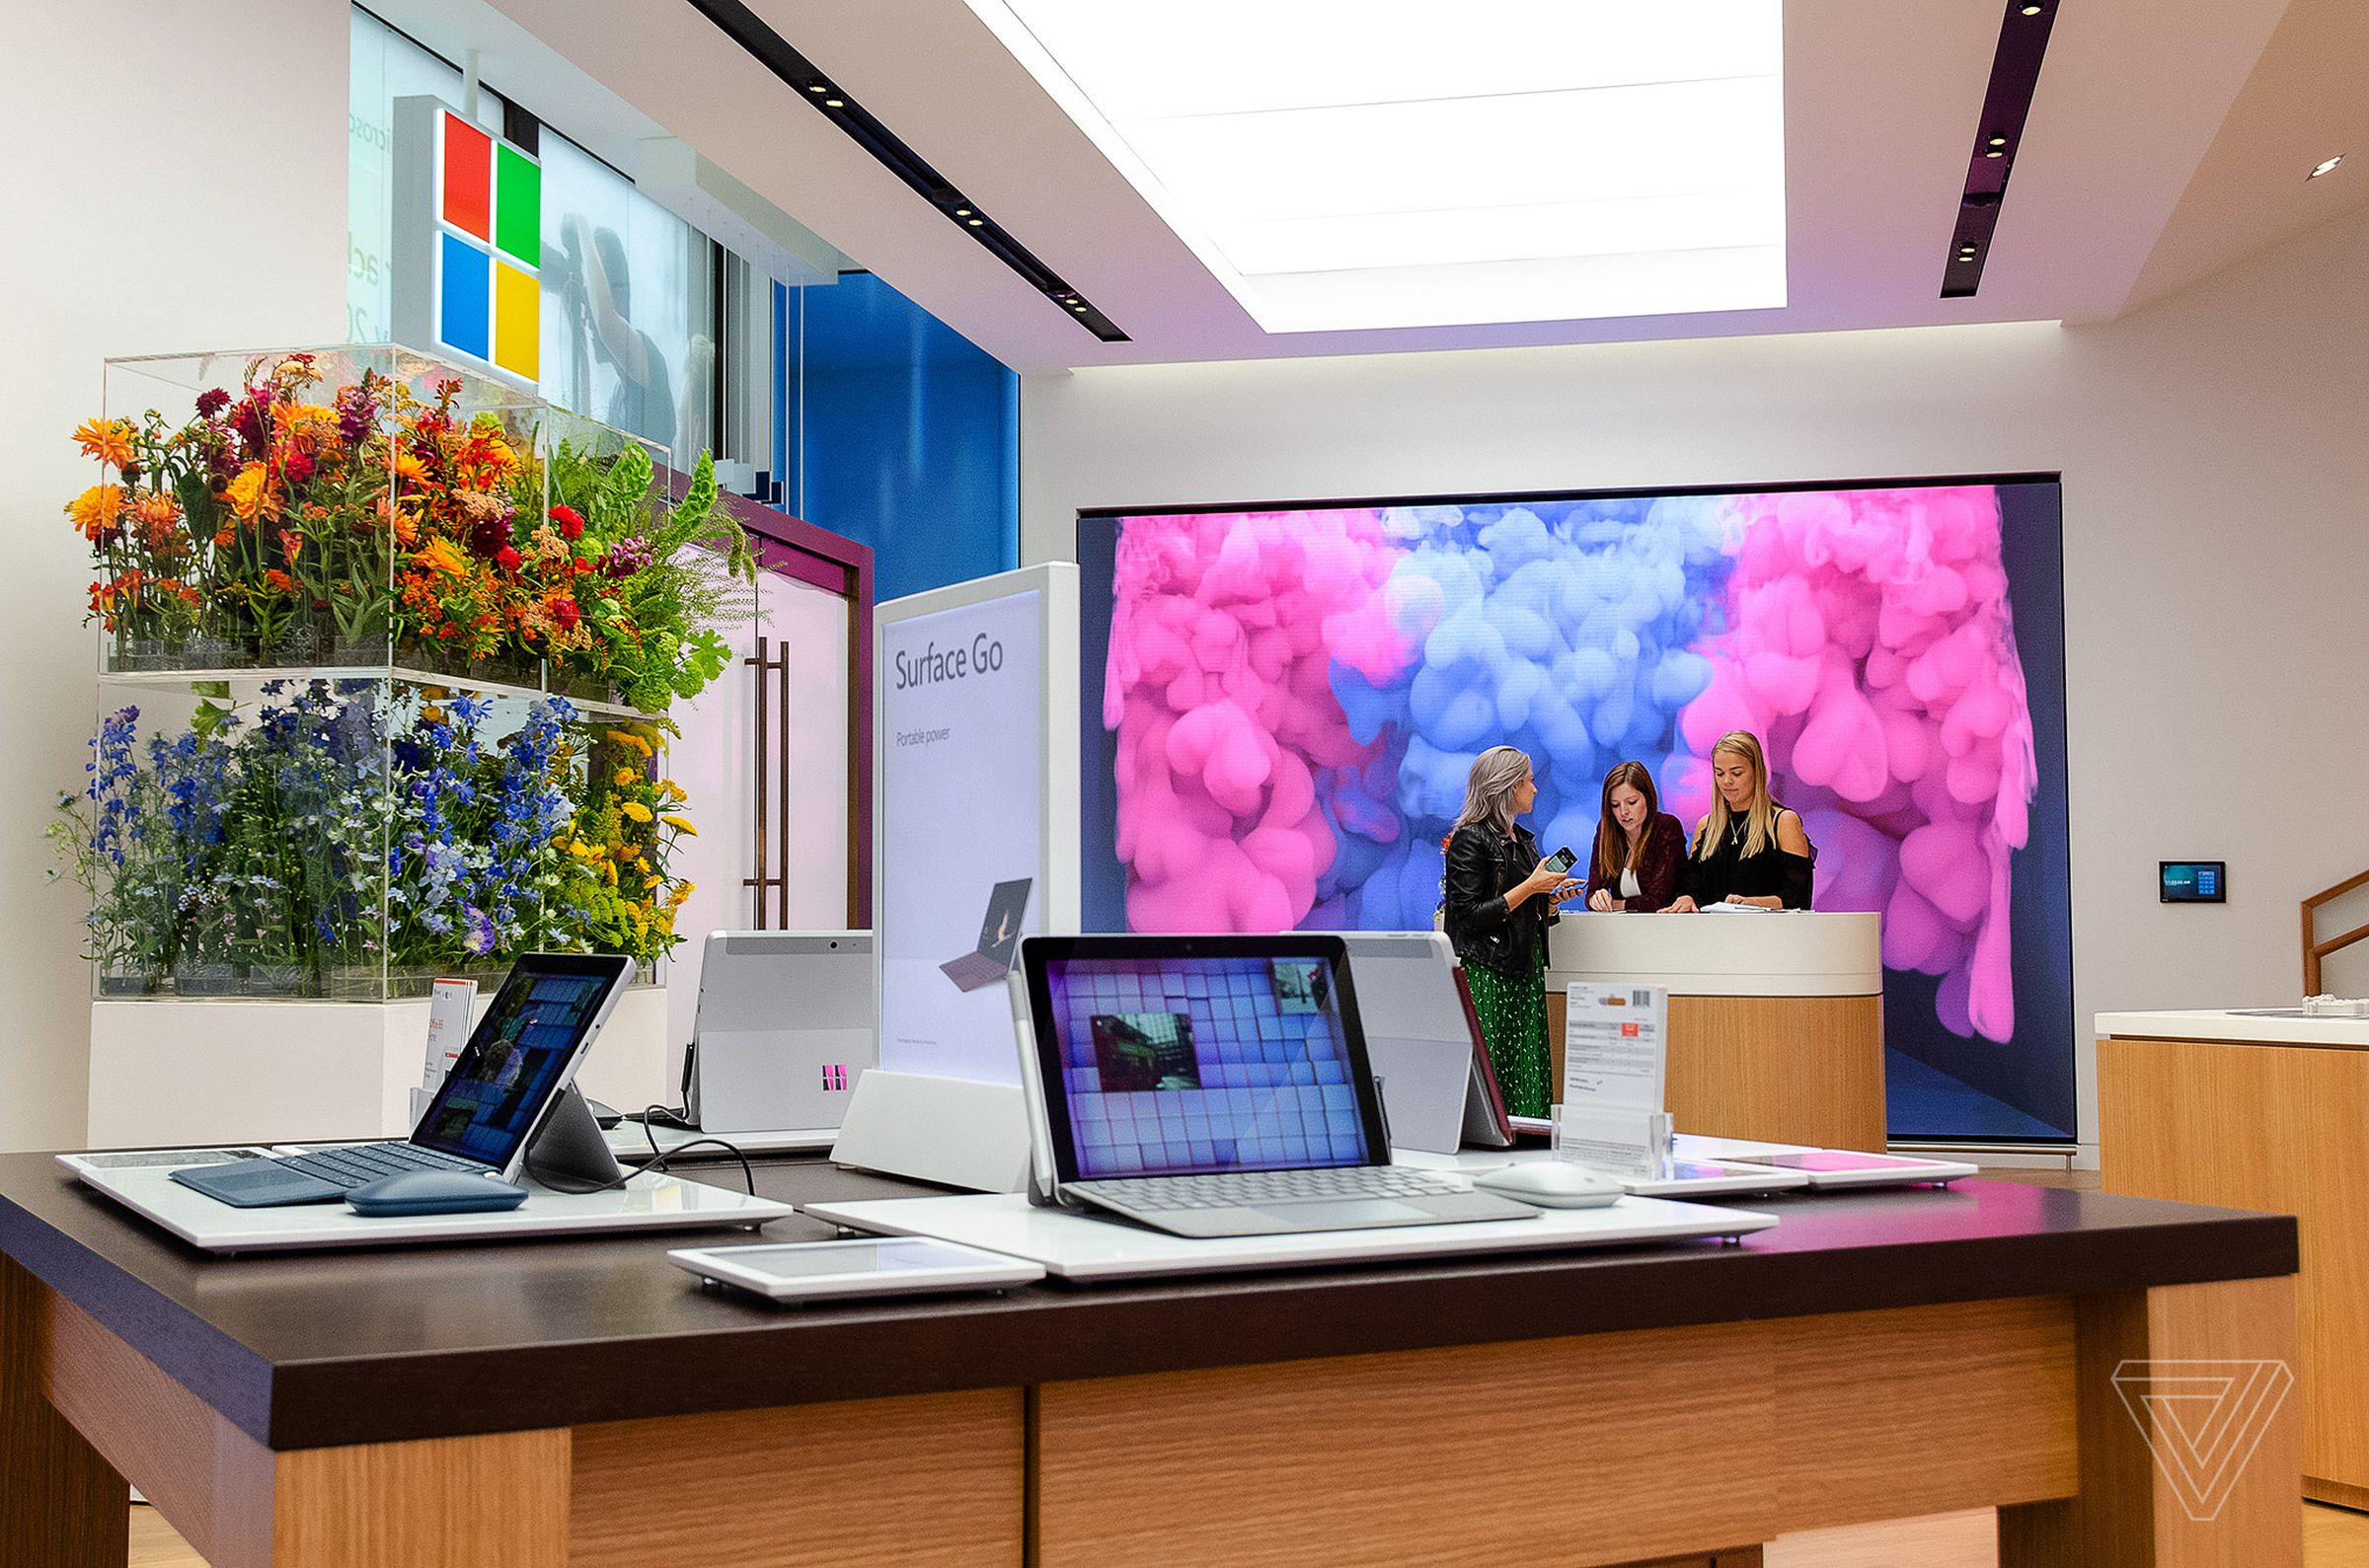 Microsoft’s Experience Center in London.